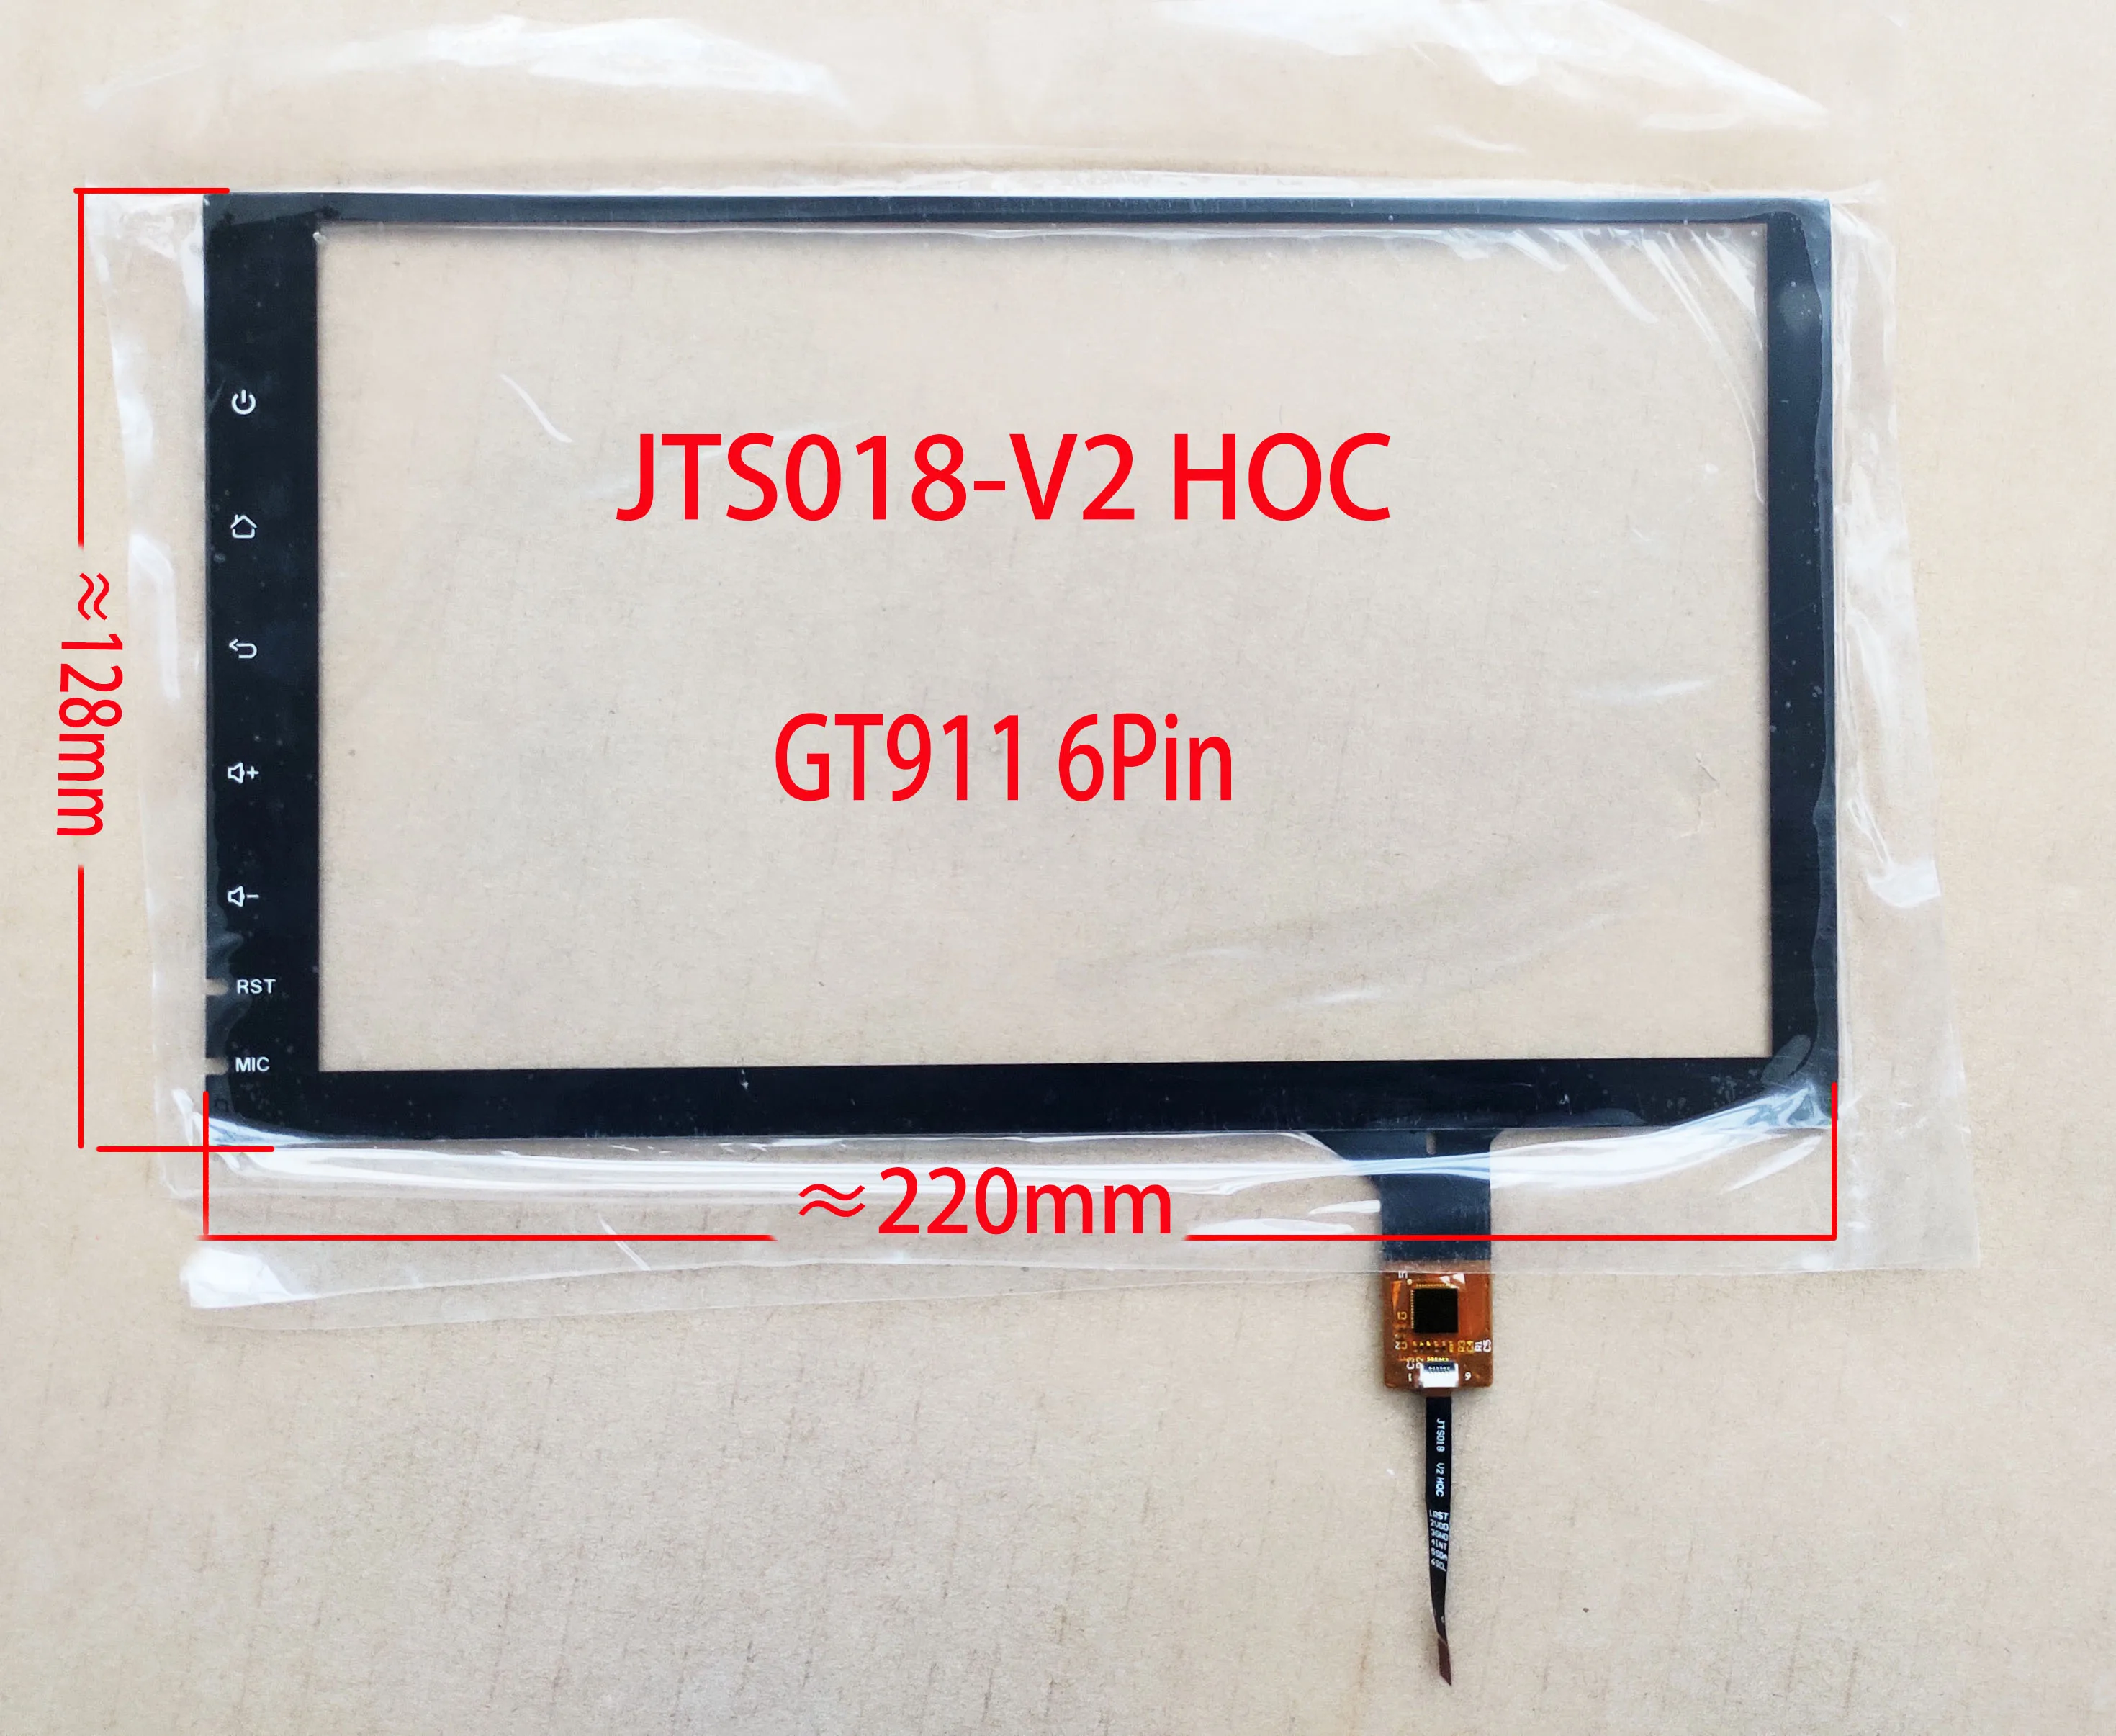 

9 Inch Capacitive Touch Screen Digitizer Sensor For Radio 220*128mm 6Pin GT911 ZP24480 JTS018 JTS368 090 For Benz B200 ML